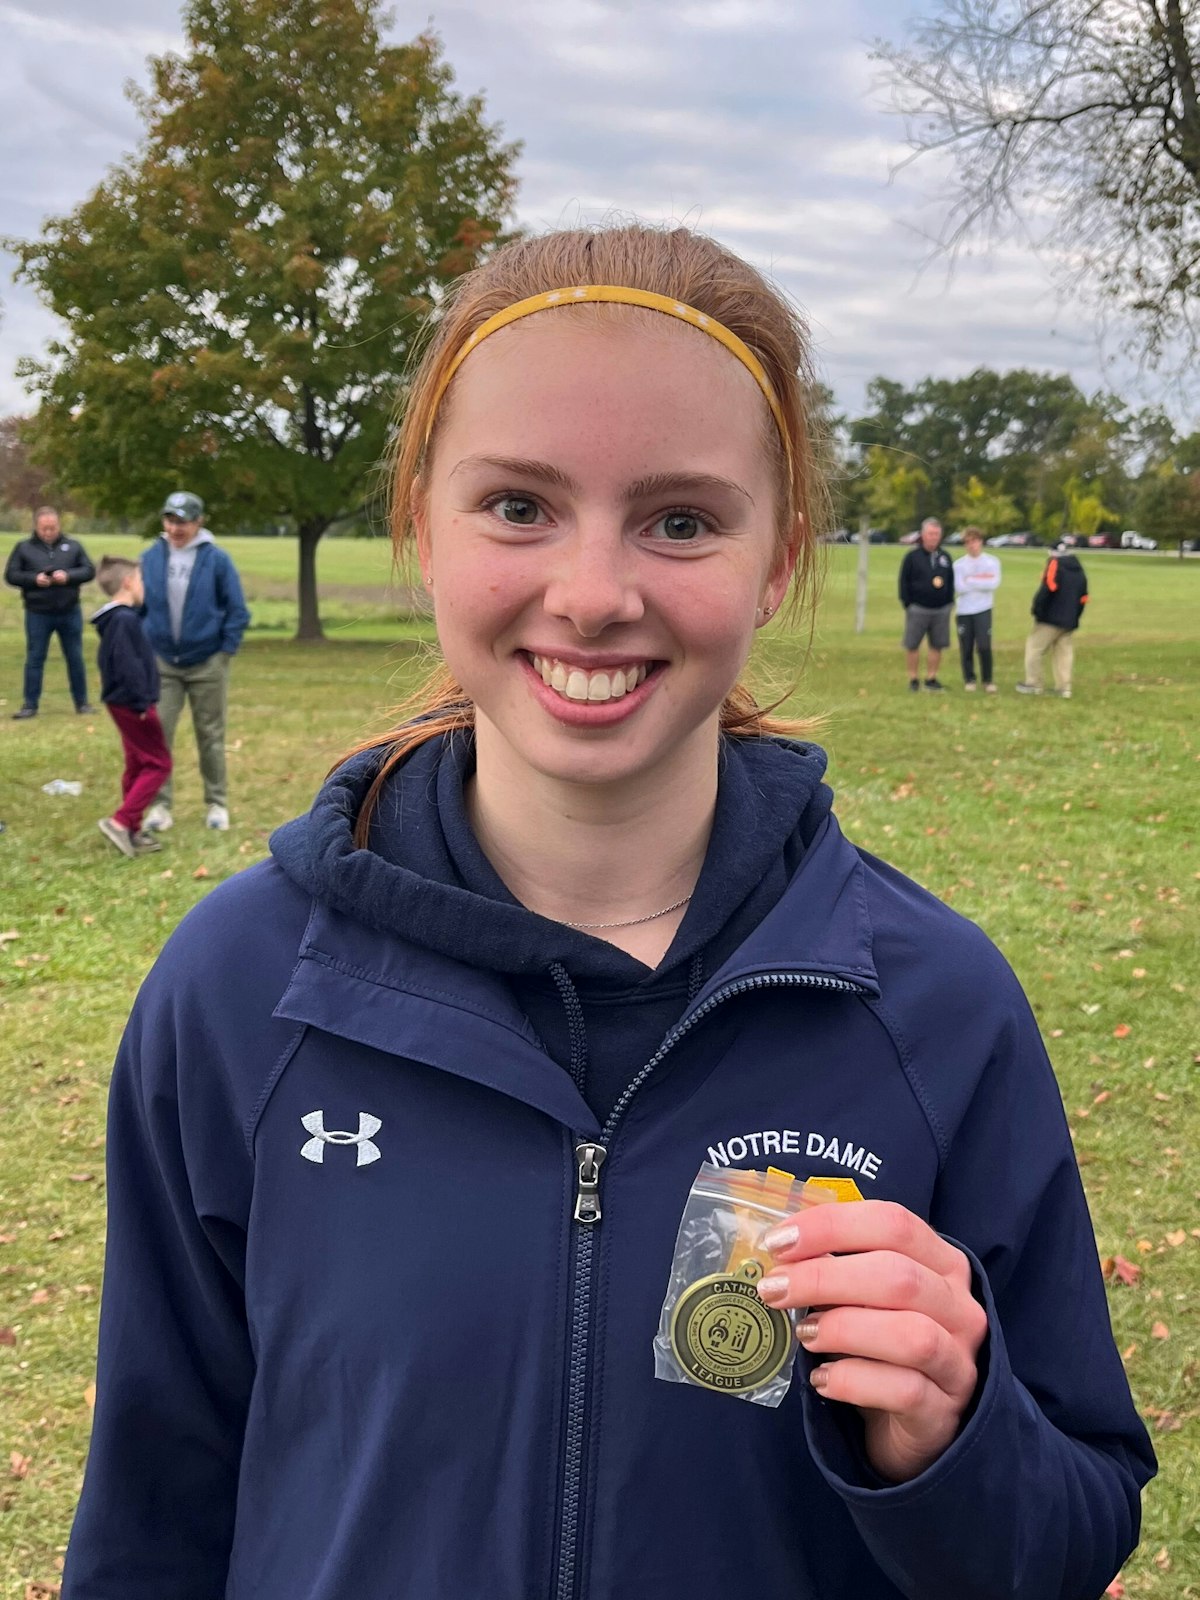 Toledo Notre Dame Academy senior Natalie Chryst was the individual champion, winning the five-kilometer race at Kensington Metropark’s Possum Hollow course on Oct. 11. (Photos courtesy of the Catholic High School League)